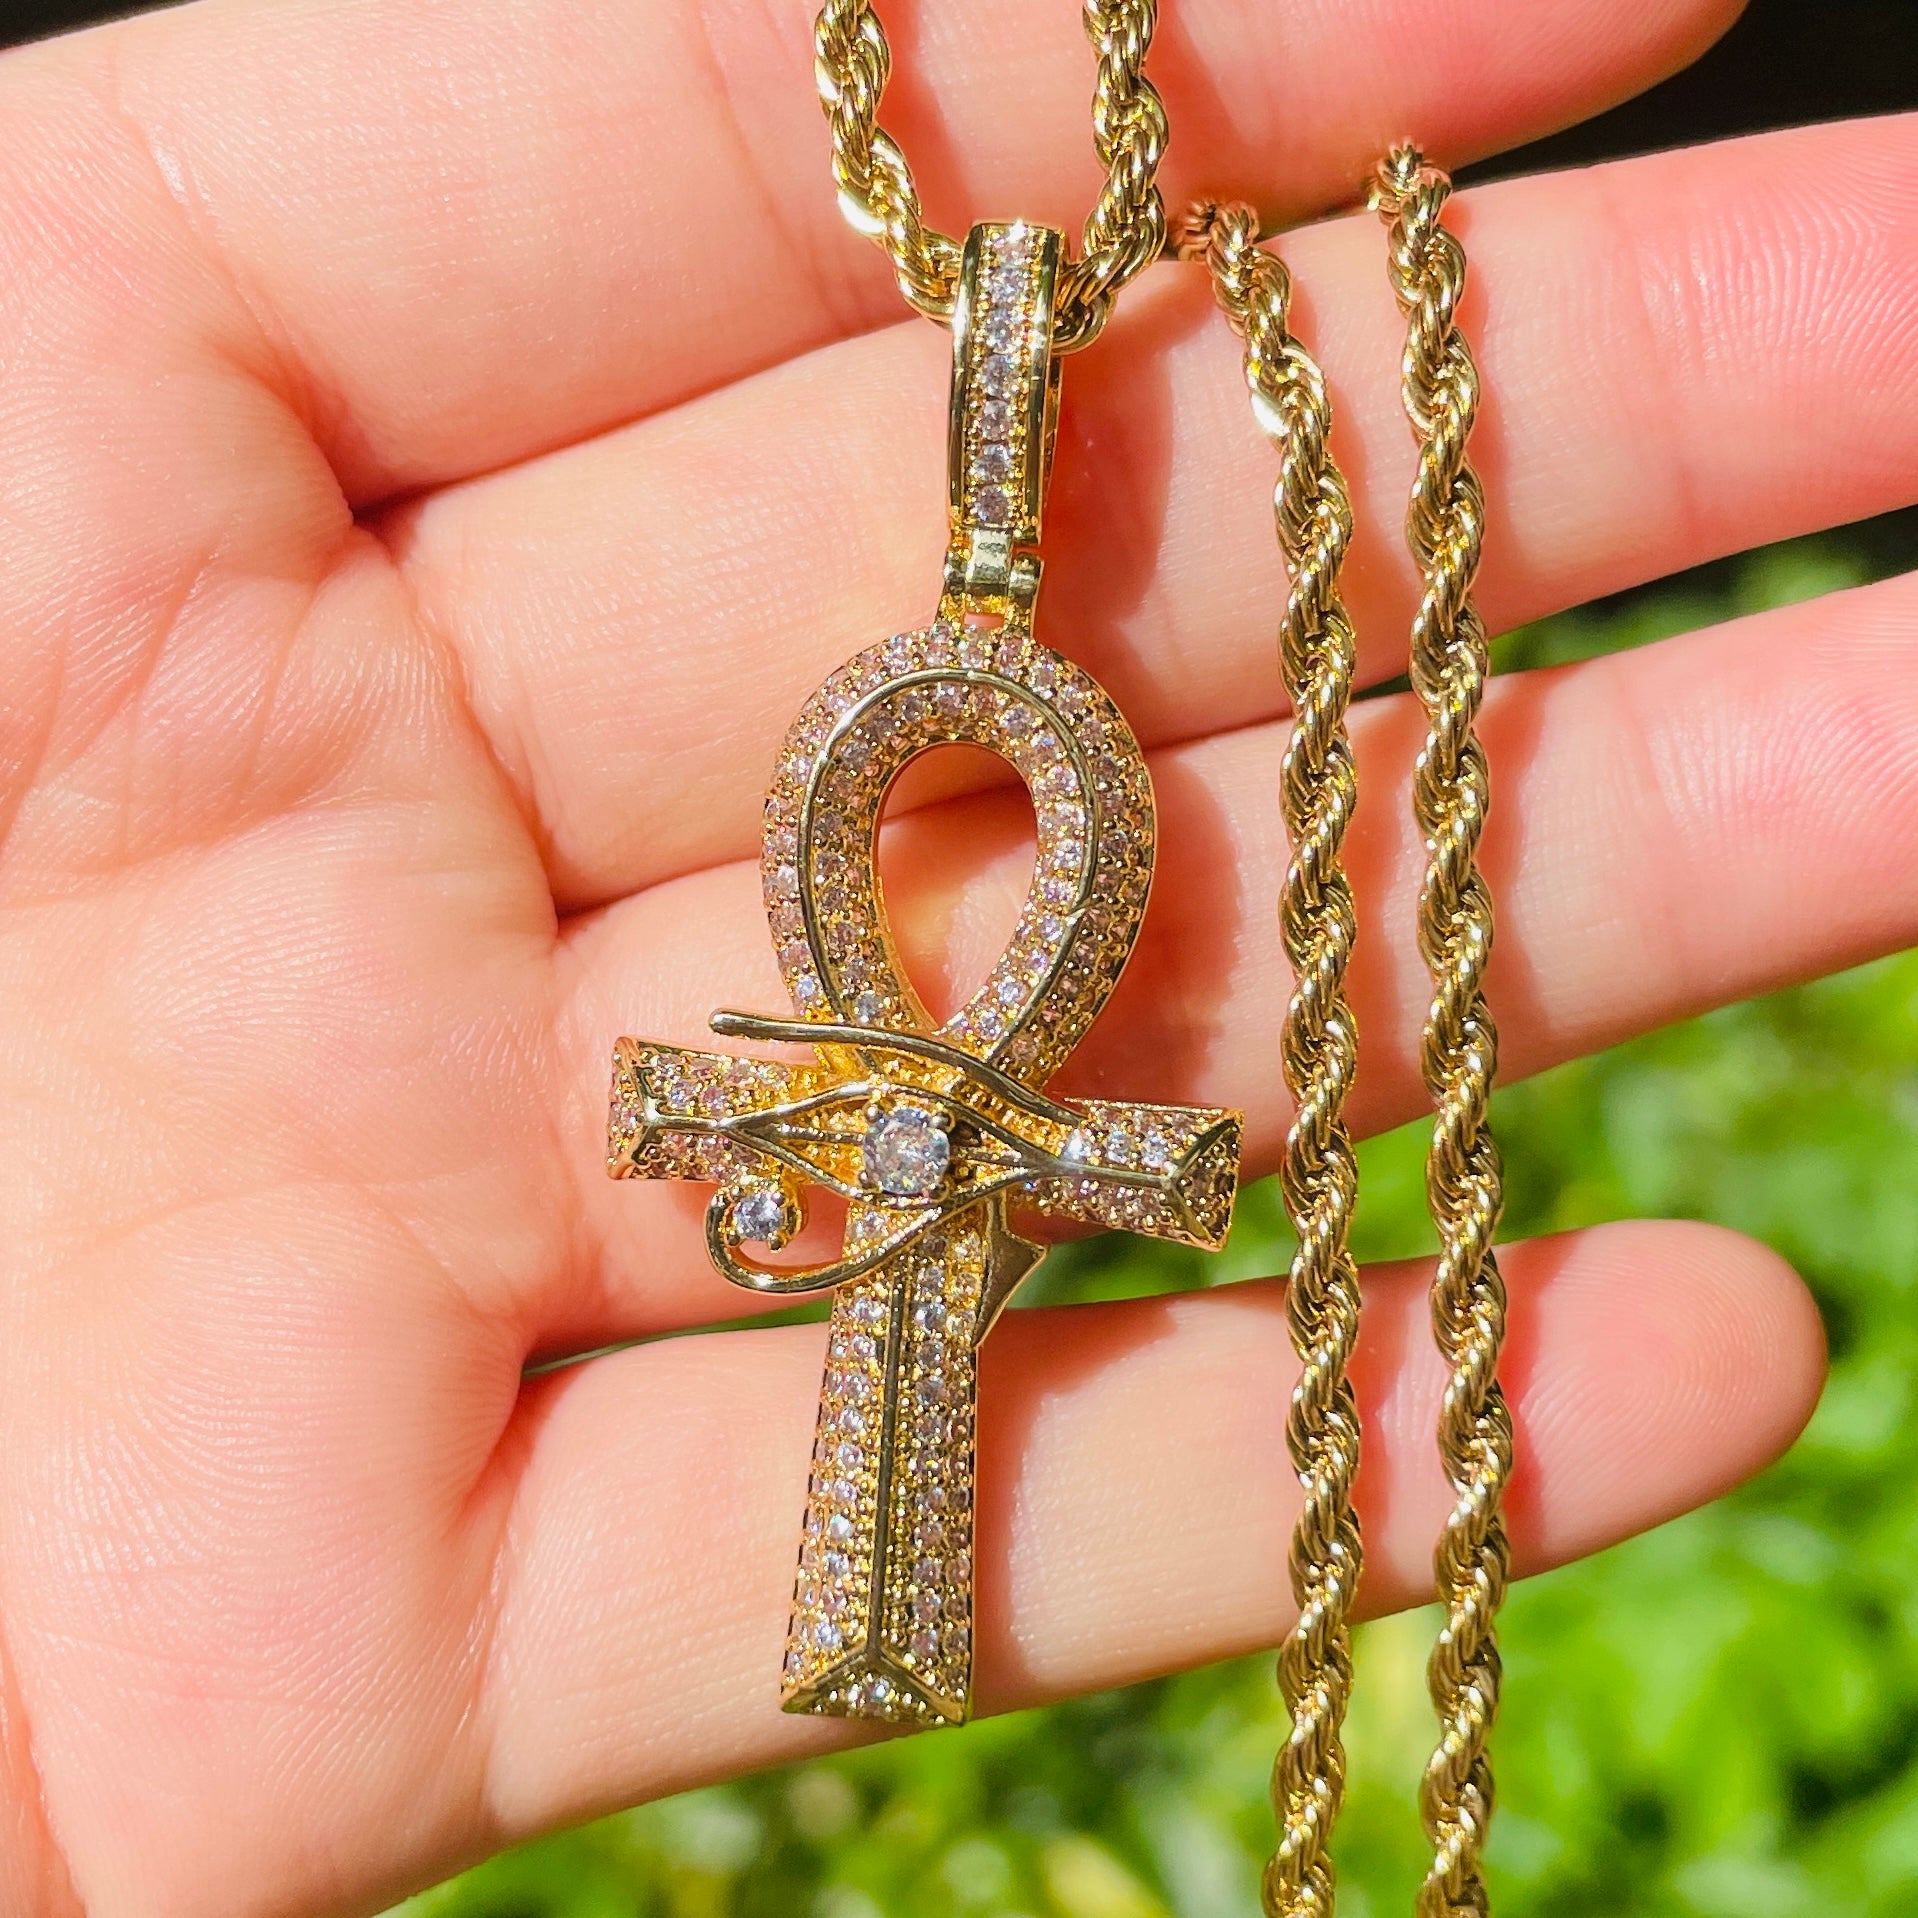 5pcs/lot 18/20/24 inch Stainless Steel Rope Chain CZ Pave Egypt Eyes of Horus ANKH Cross Necklace Gold Necklaces Charms Beads Beyond